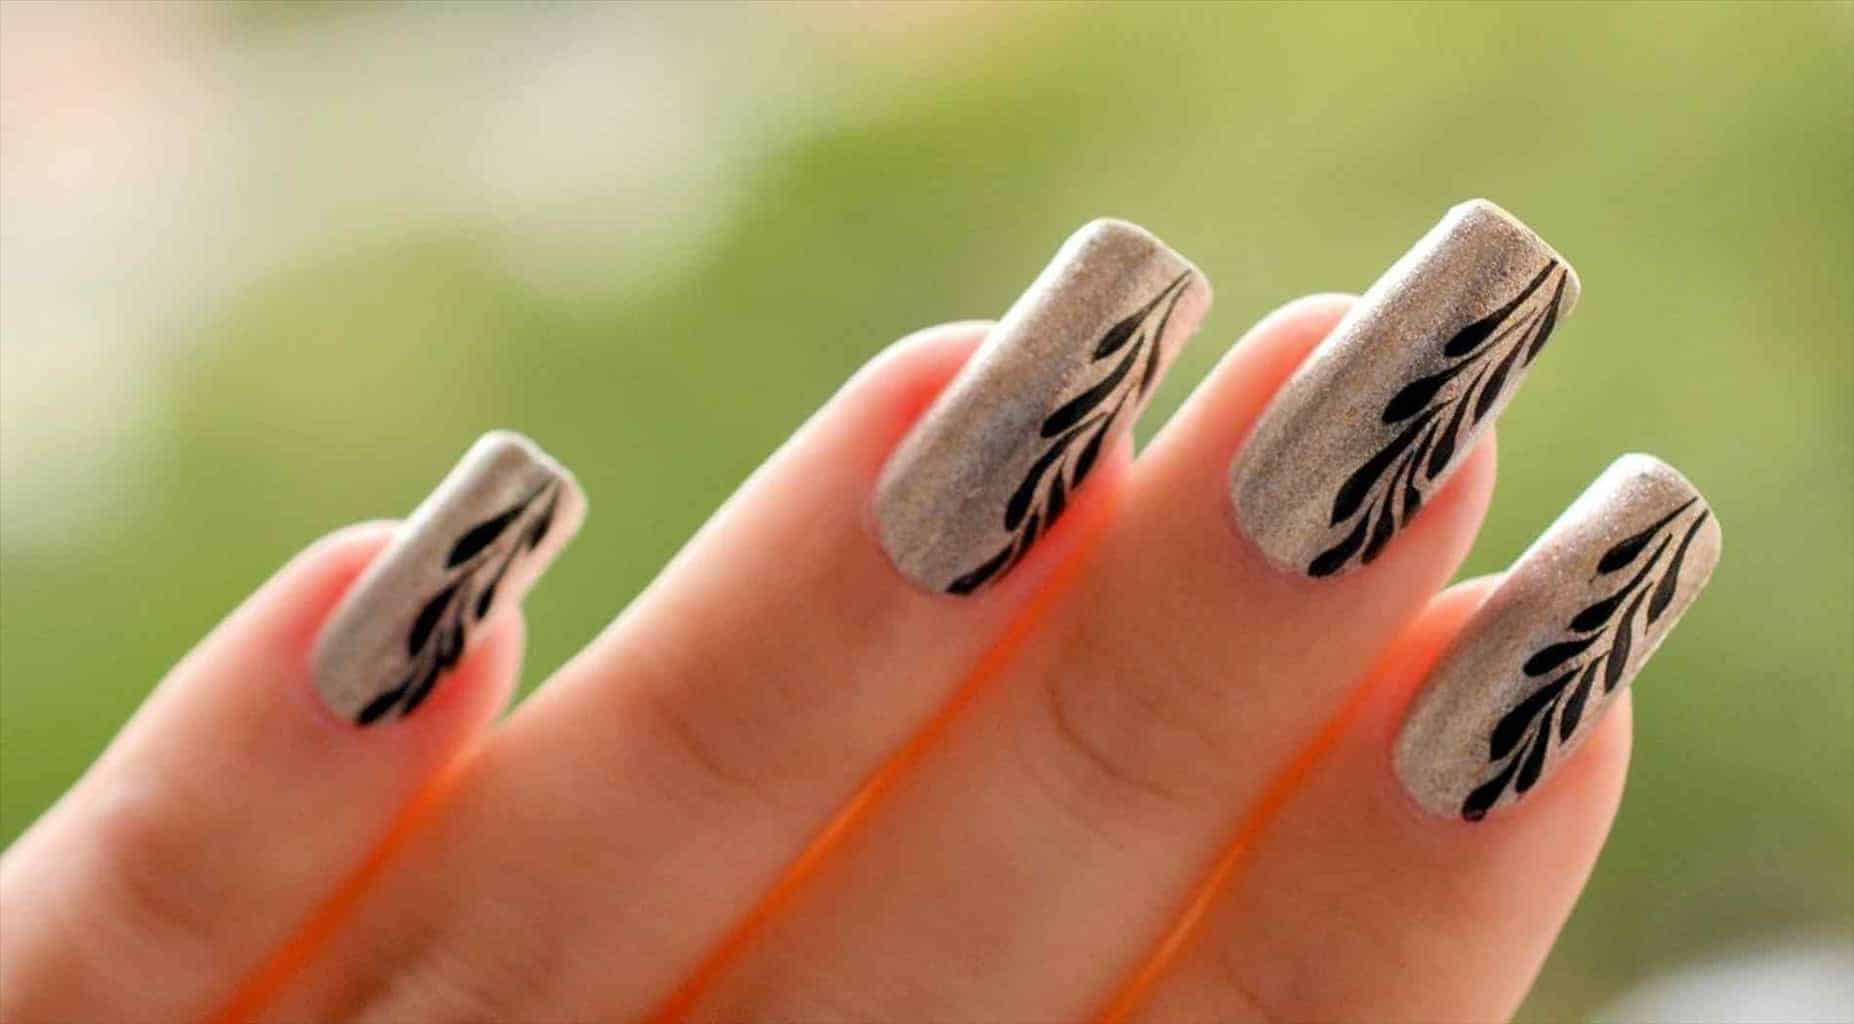 7. "Christmas Nail Art Tutorials for Beginners to Create a Cool and Festive Look" - wide 6